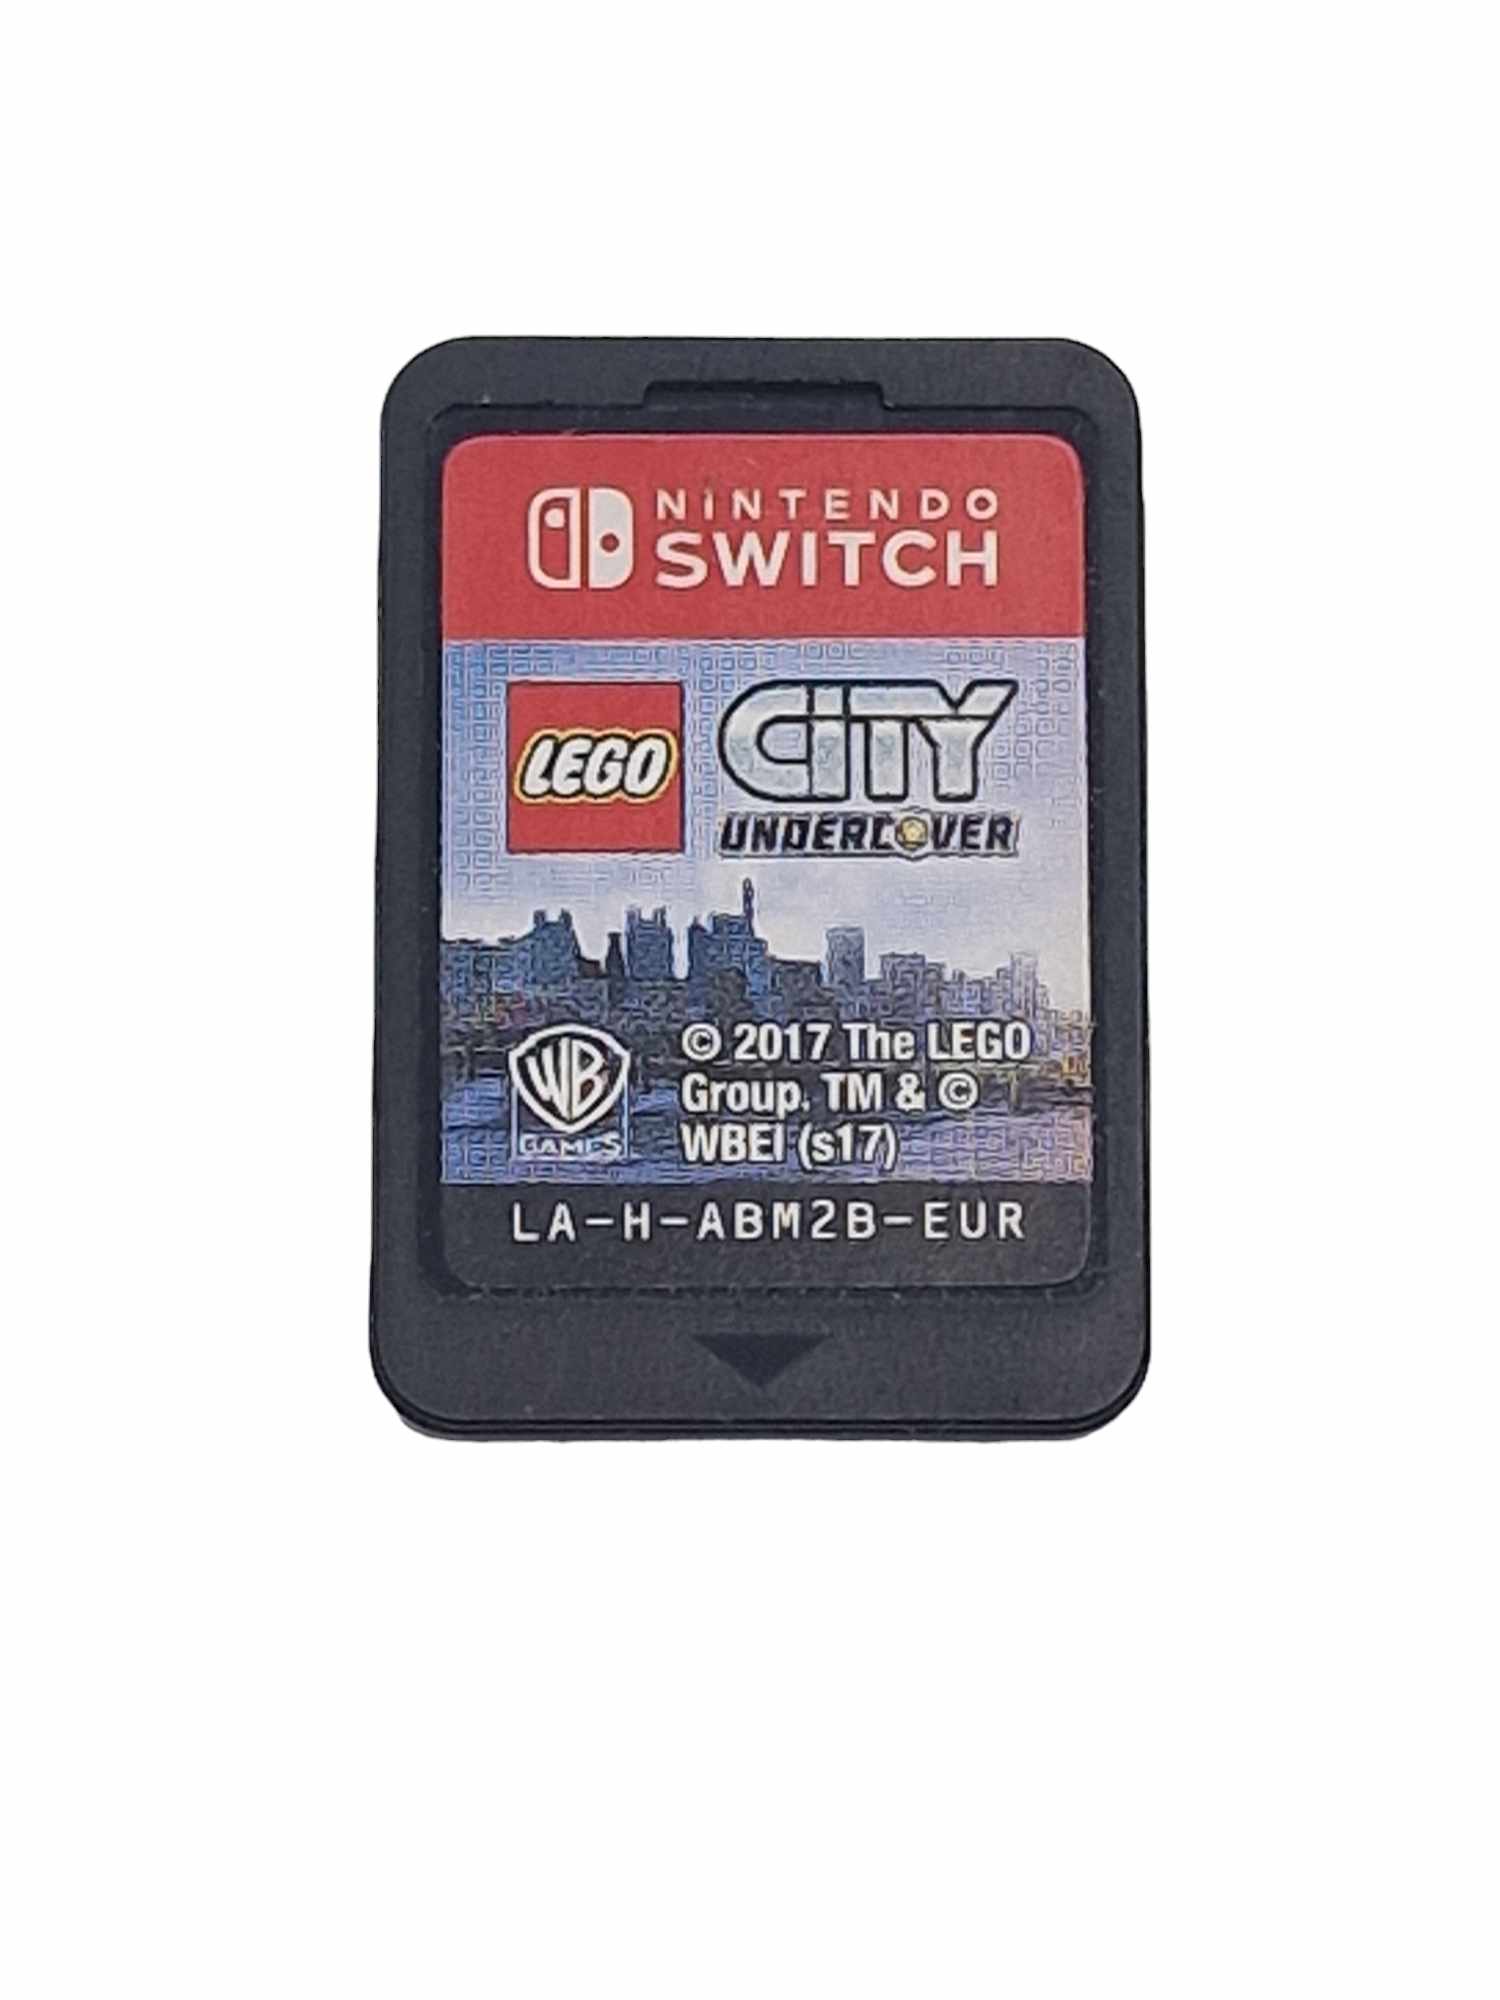 Nintendo Switch Lego City Undercover Cartridge Only 